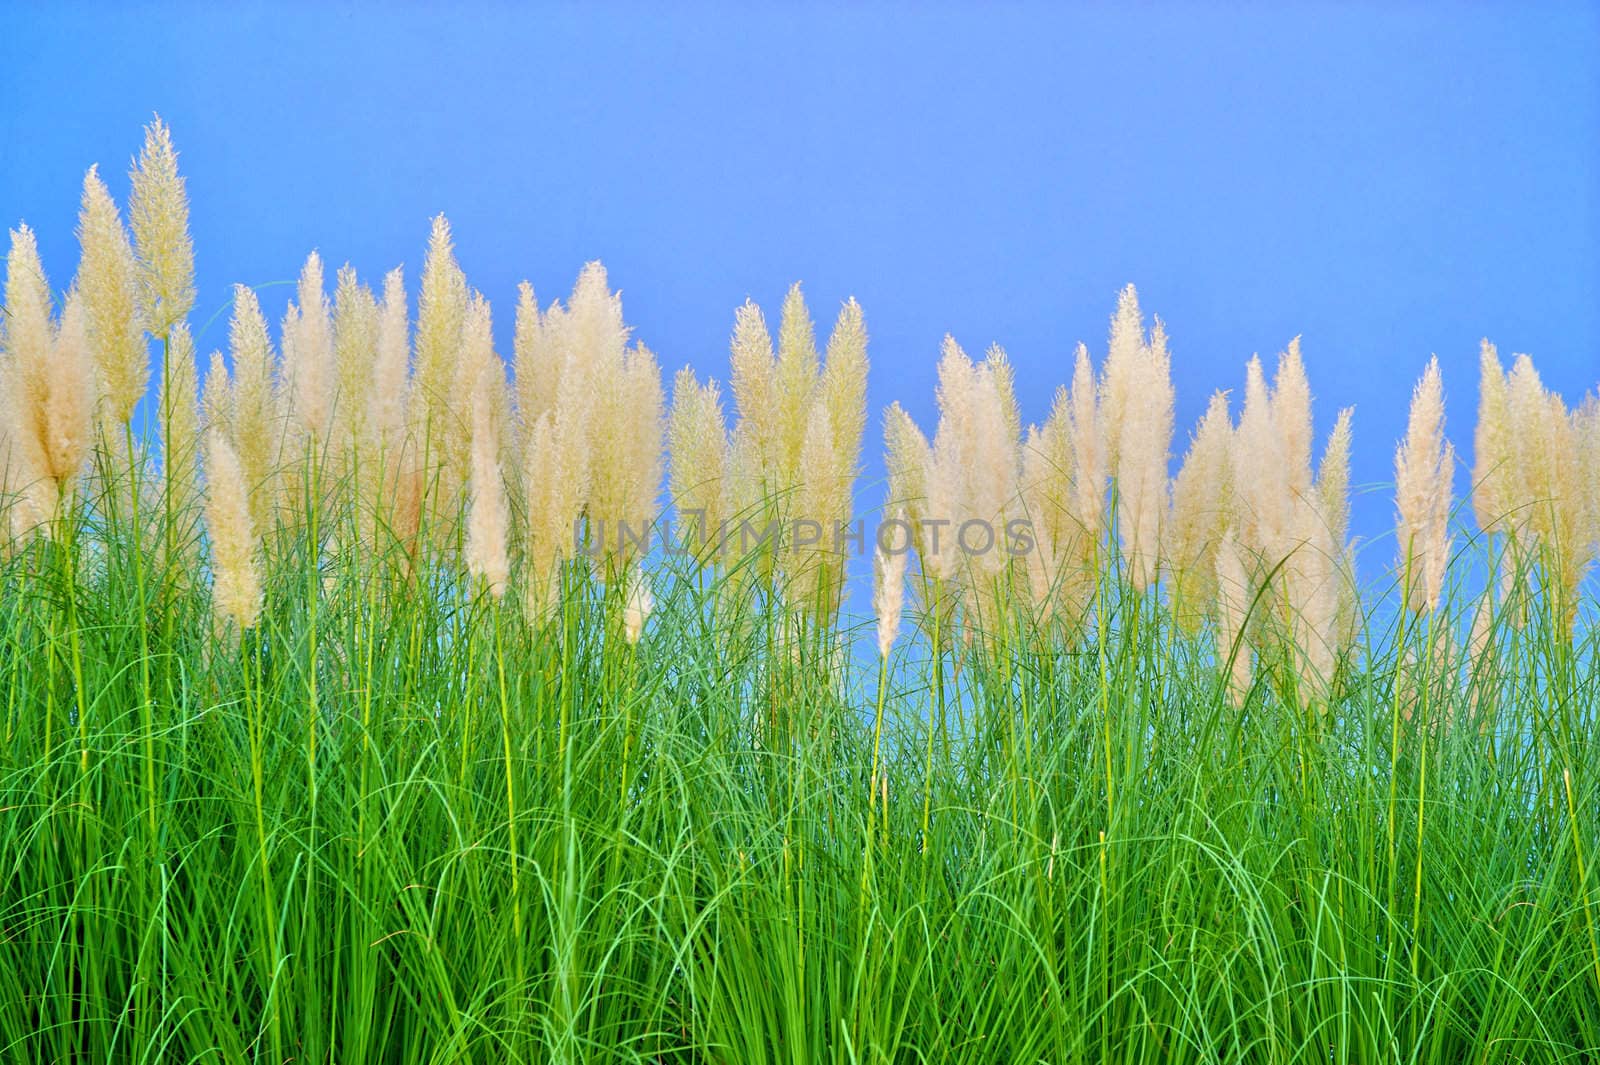 environment-friendly reeds by jackq